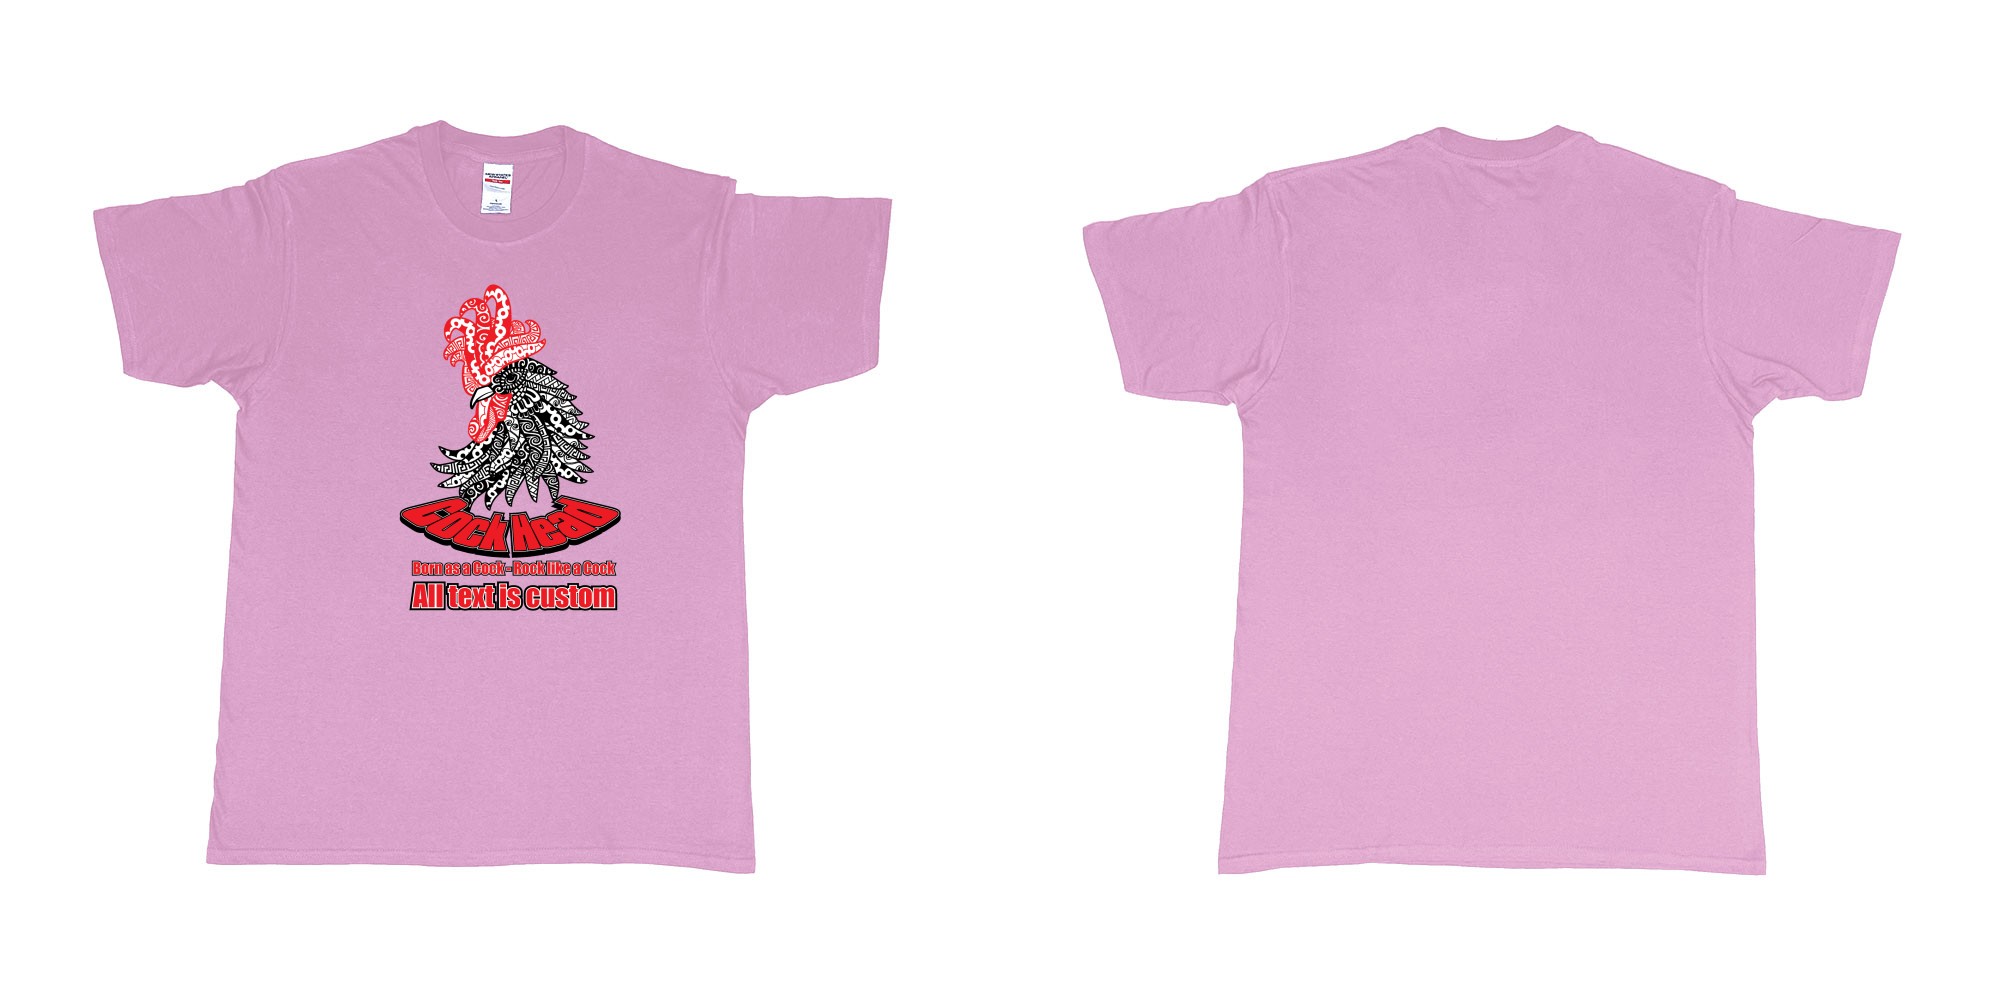 Custom tshirt design cock head rooster zodiac sign in fabric color light-pink choice your own text made in Bali by The Pirate Way